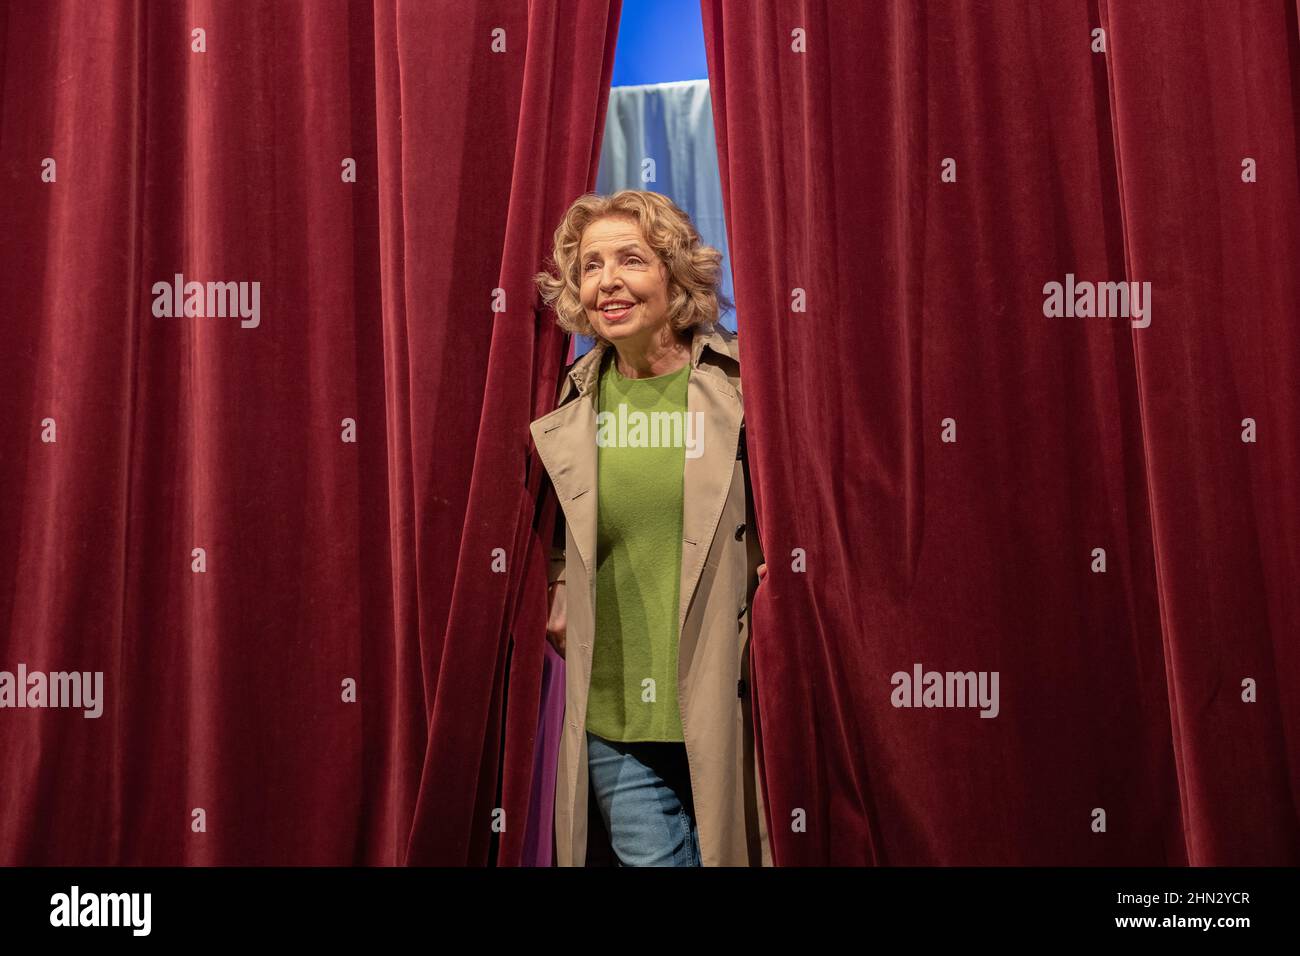 Michaela May ( real name Gertraud Elisabeth Berta Franziska Mittermayr ) at the photo call for The Budgie ( original from Audrey Schebat La Perruche ) on January 10, 2022 in the COmedy n the Bayerischer Hof in Munich, Germany. (Photo by Alexander Pohl/Sipa USA) Stock Photo